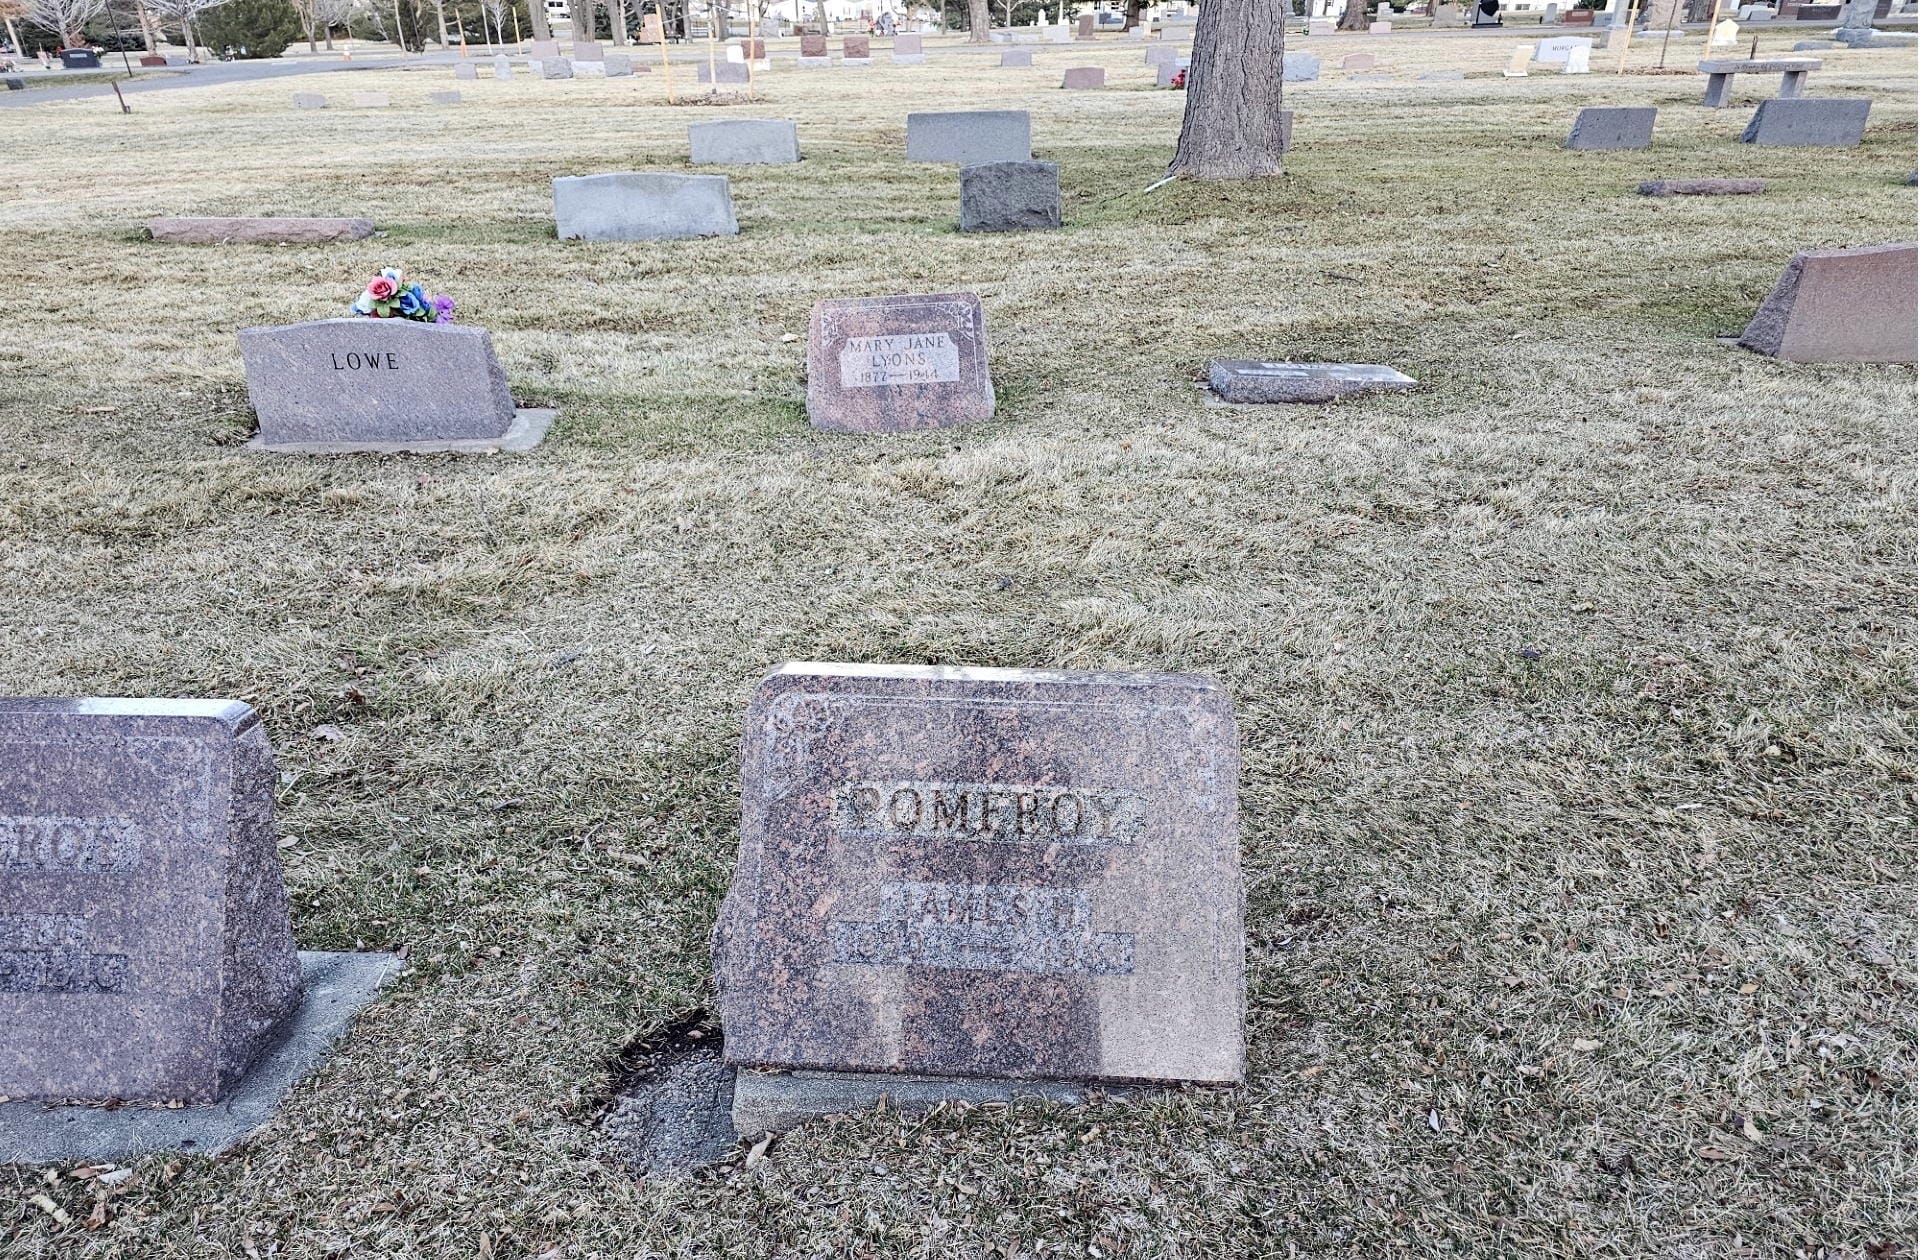 Red granite headstone with POMEROY engraved.  Other gravestones visible in the area.